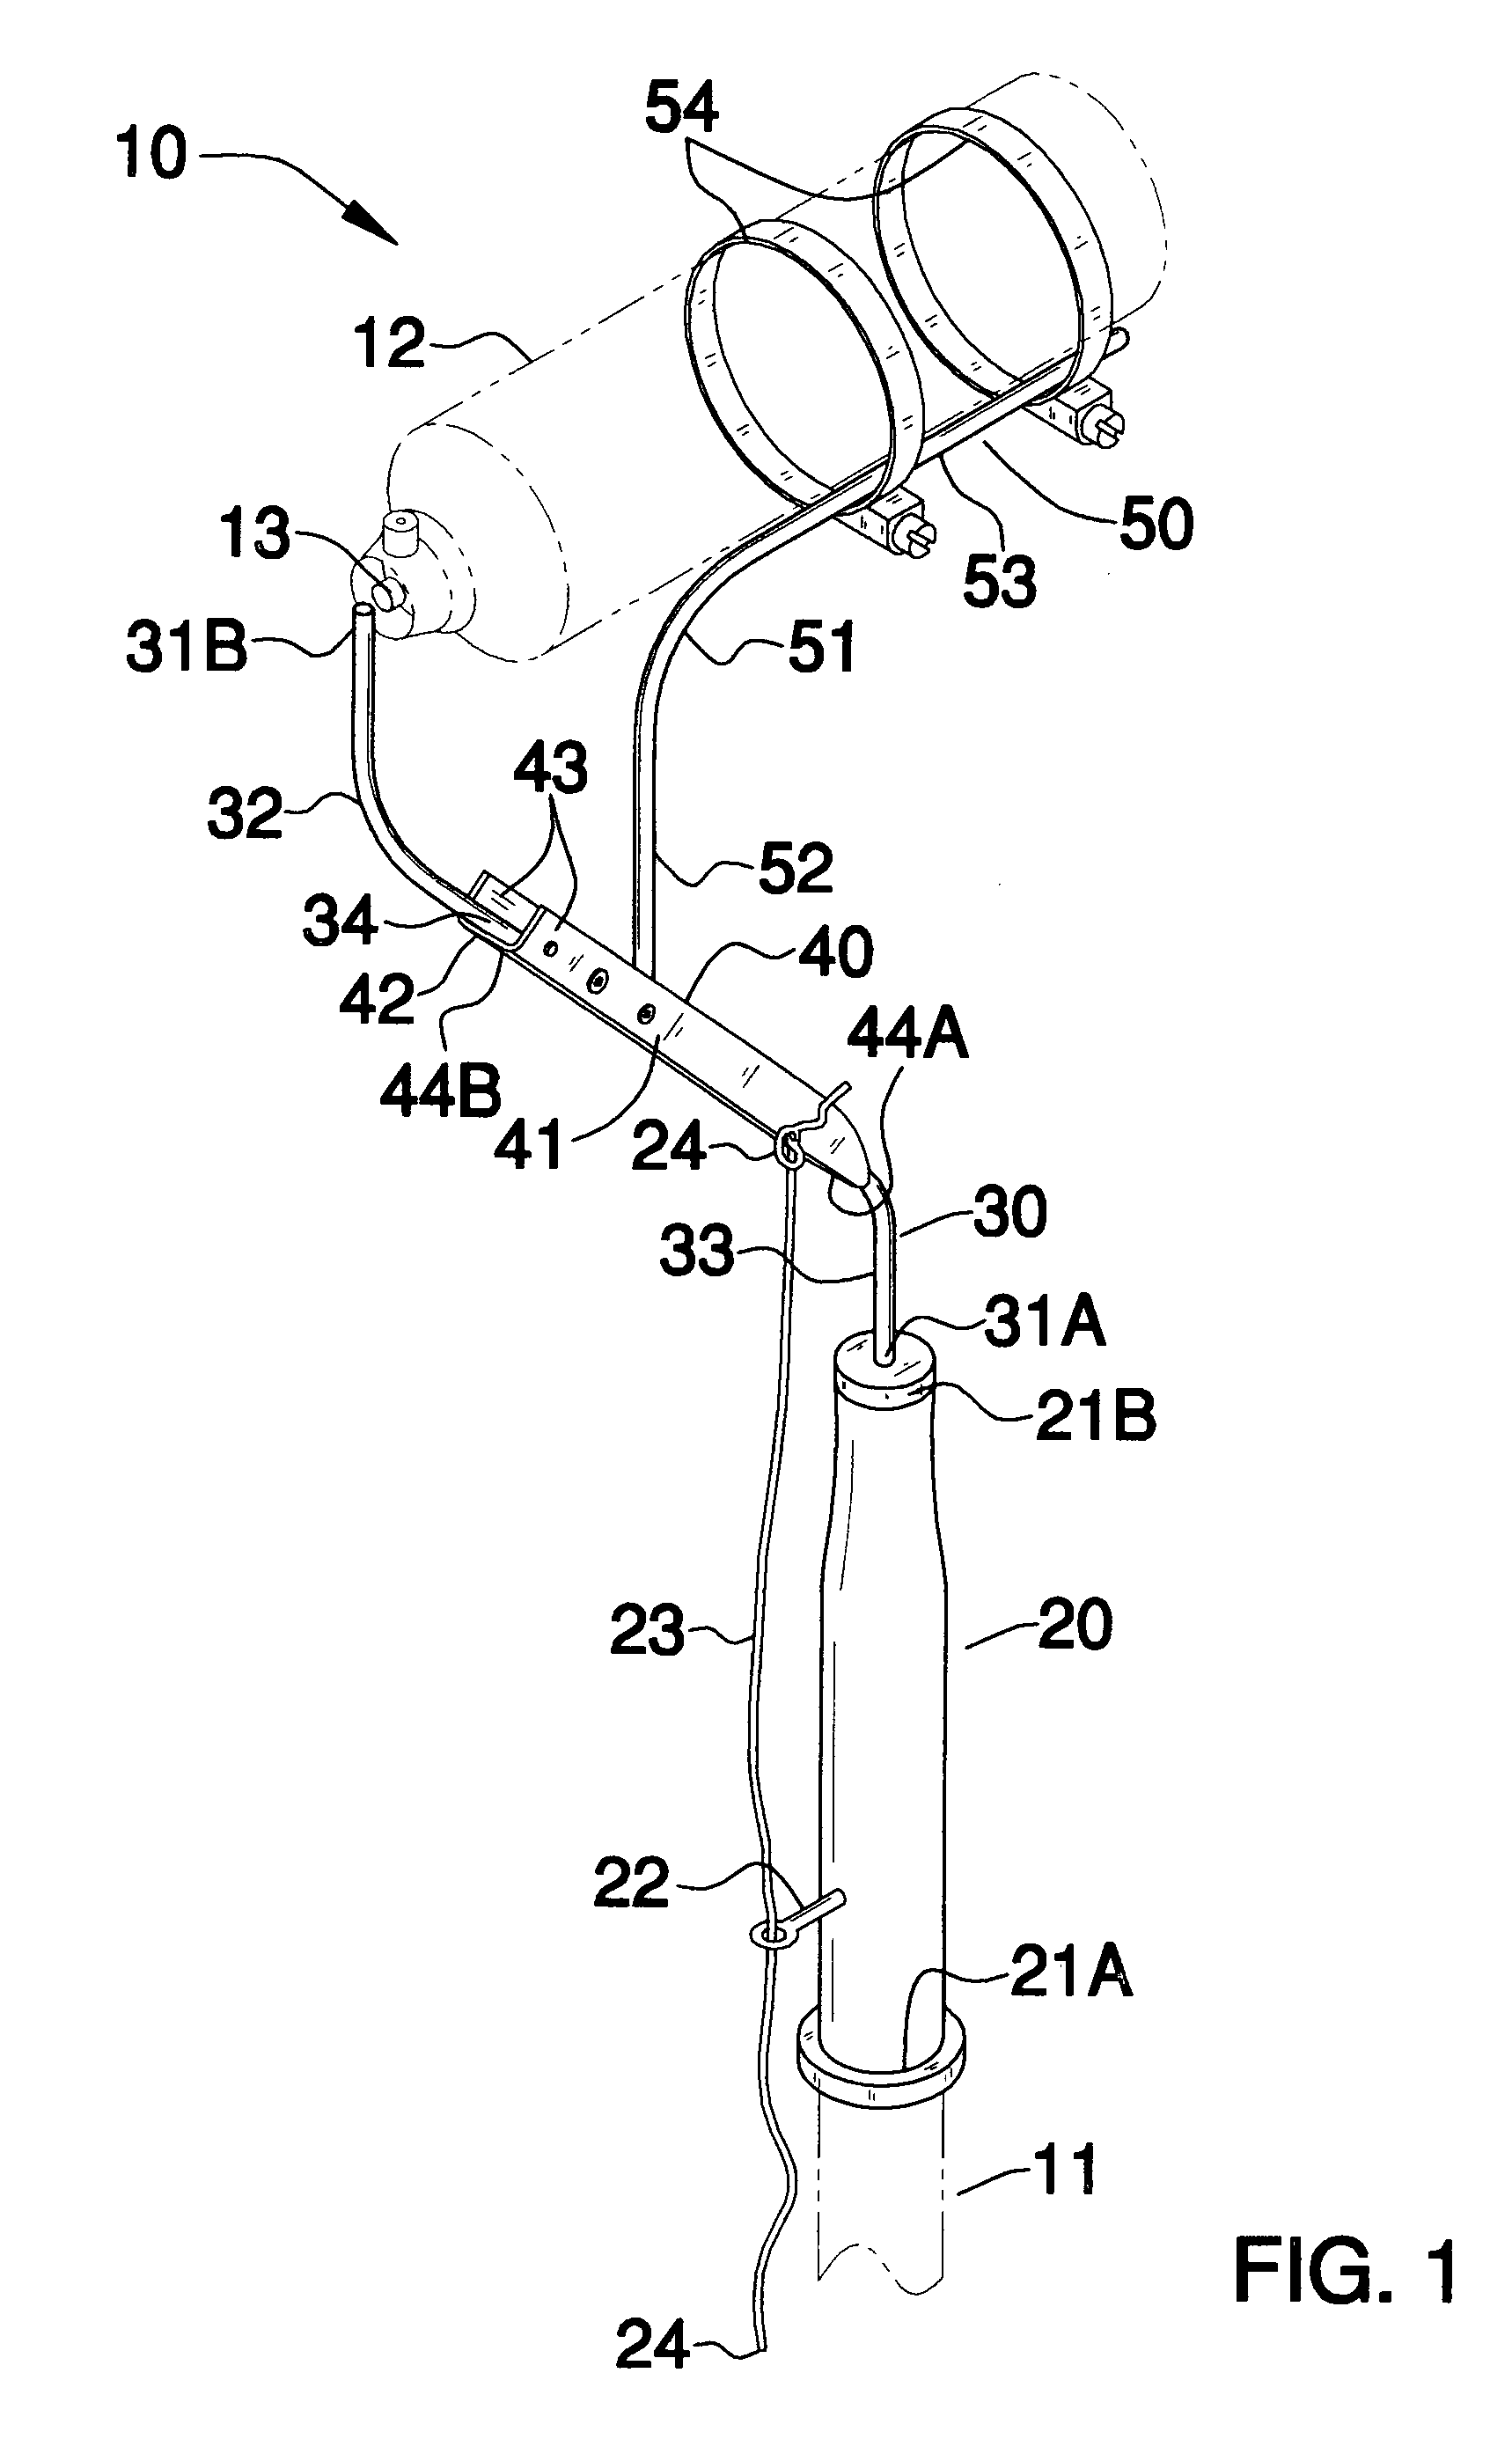 Apparatus for remotely supporting and operating an aerosol canister